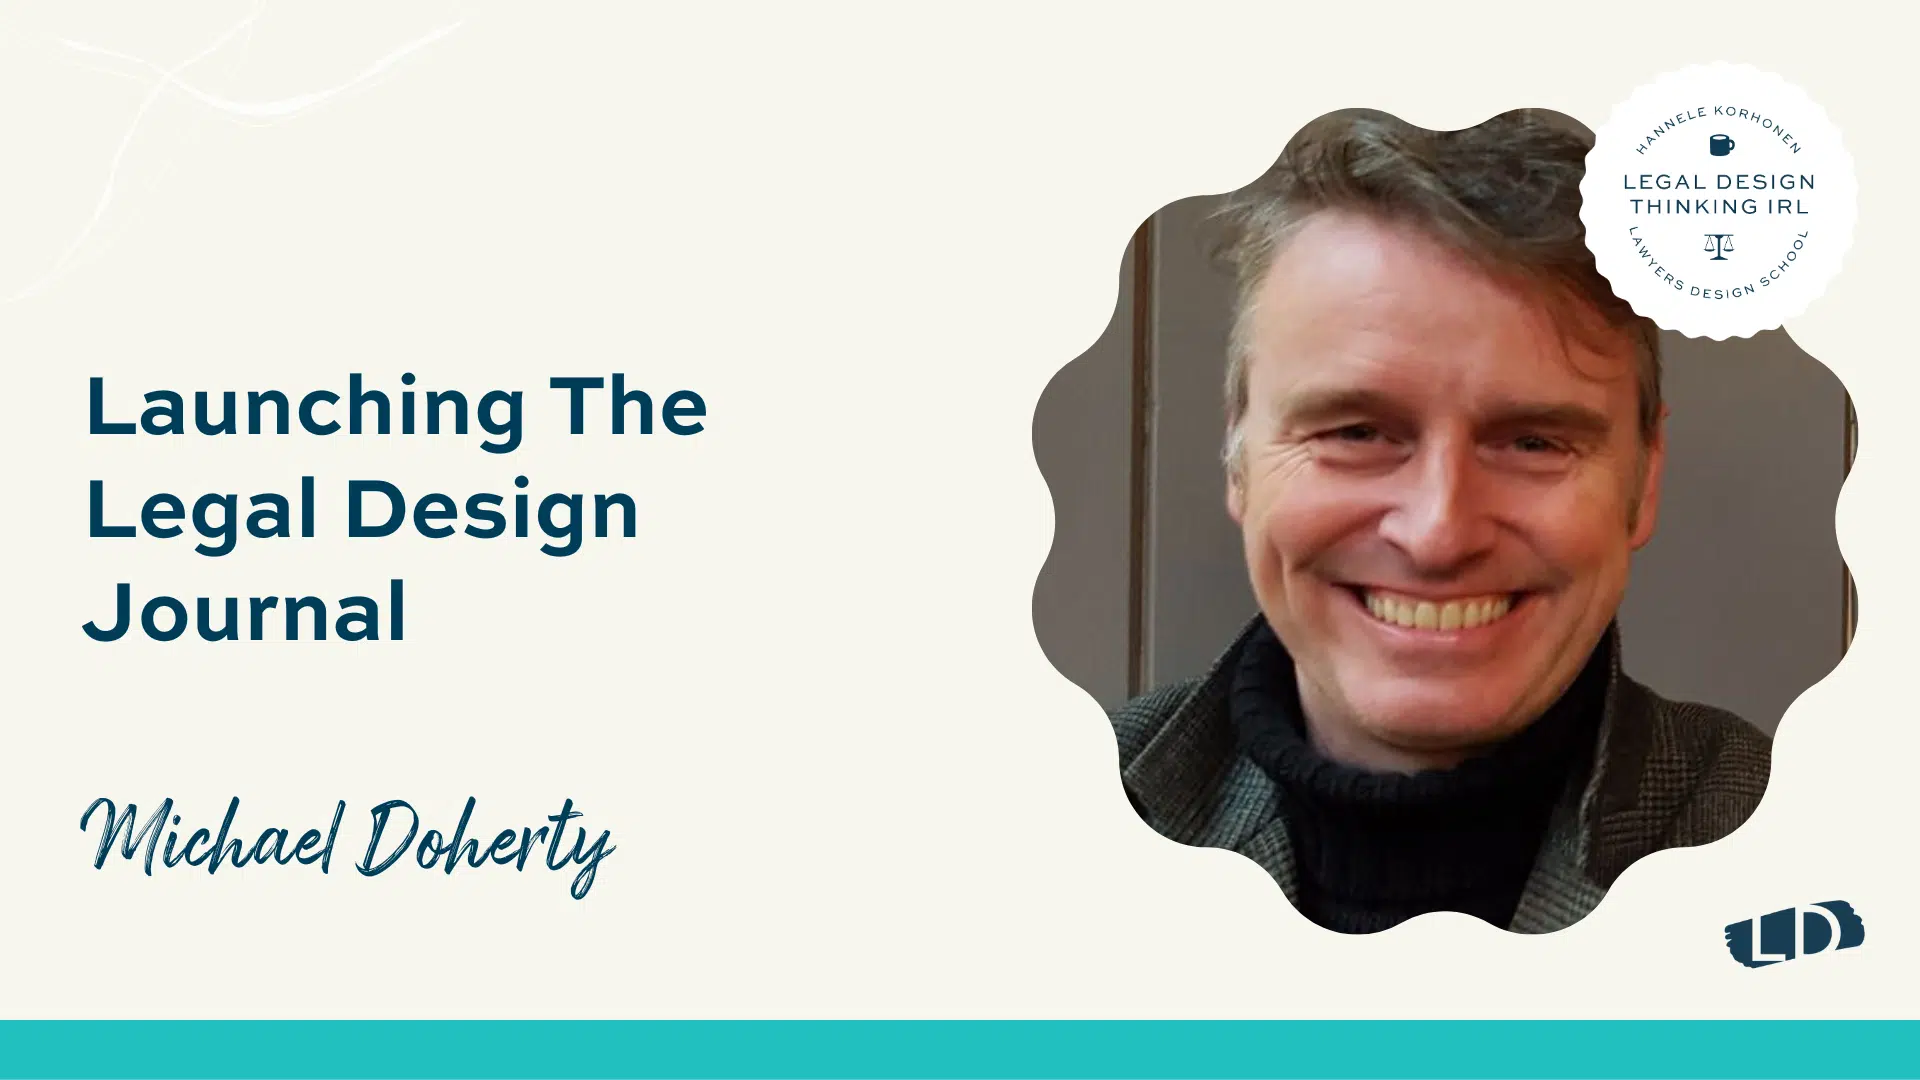 Launching the Legal Design Journal with Michael Doherty